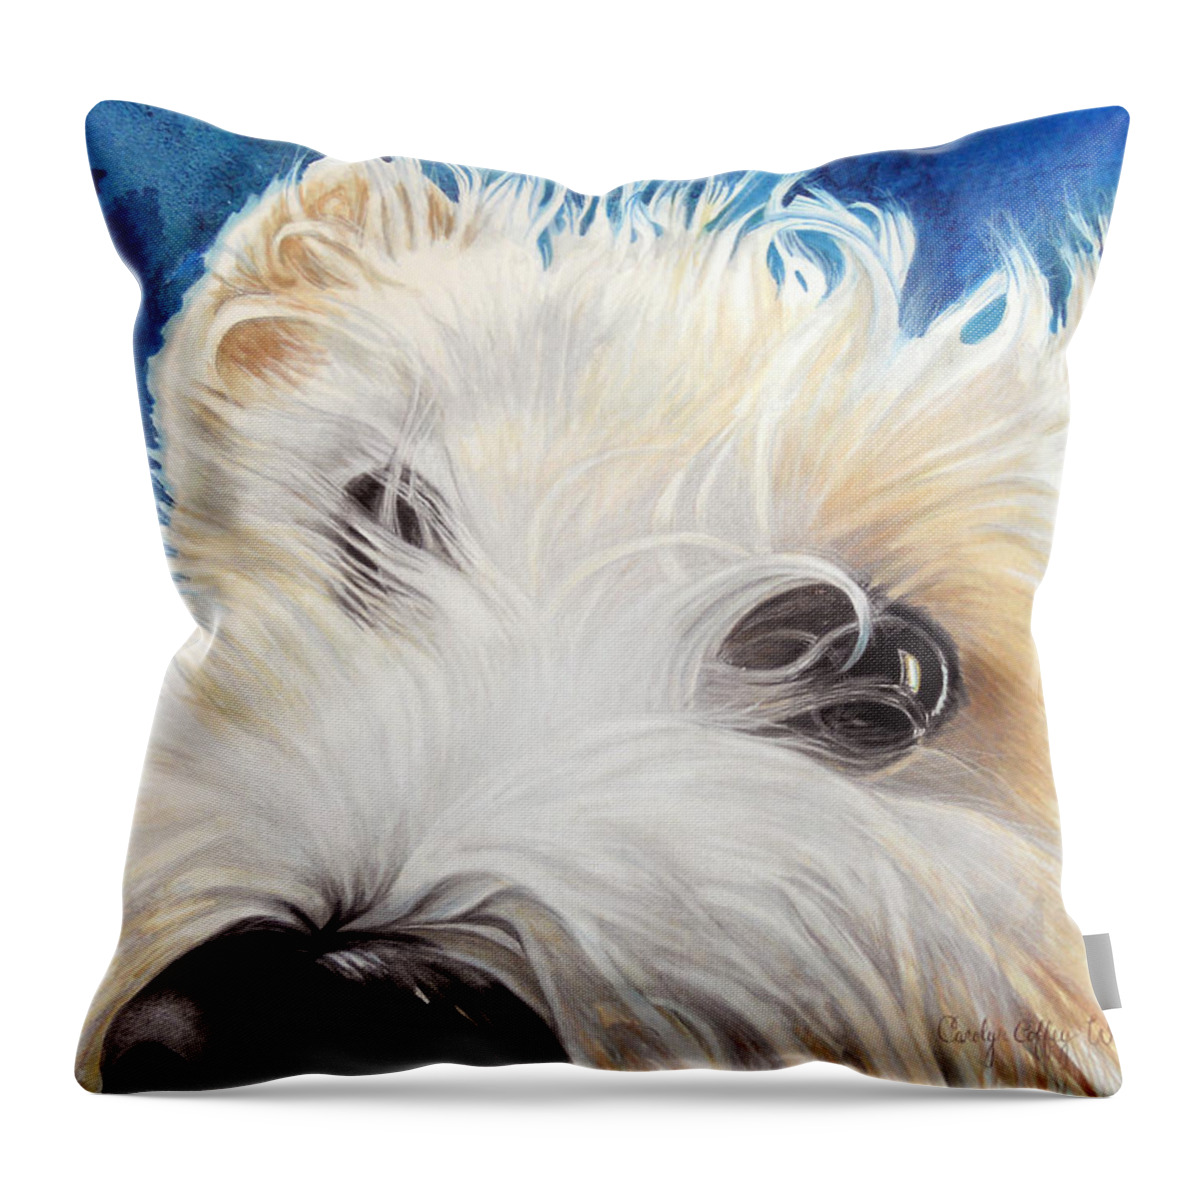 Art Throw Pillow featuring the painting Albus by Carolyn Coffey Wallace